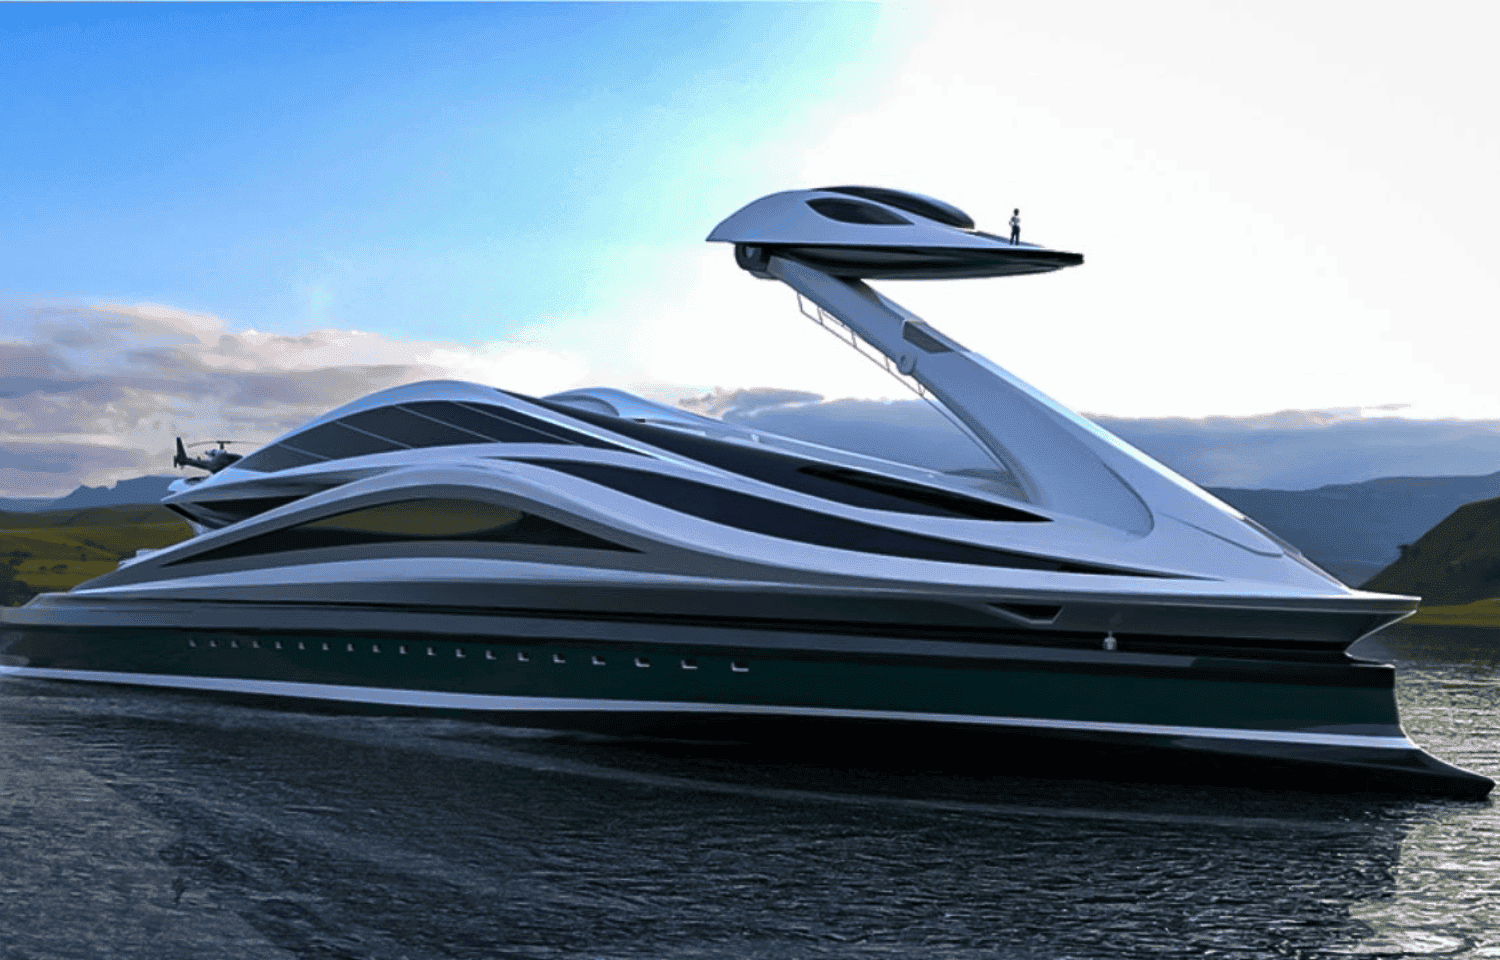 Reason Why The Super-Rich Love Yachts